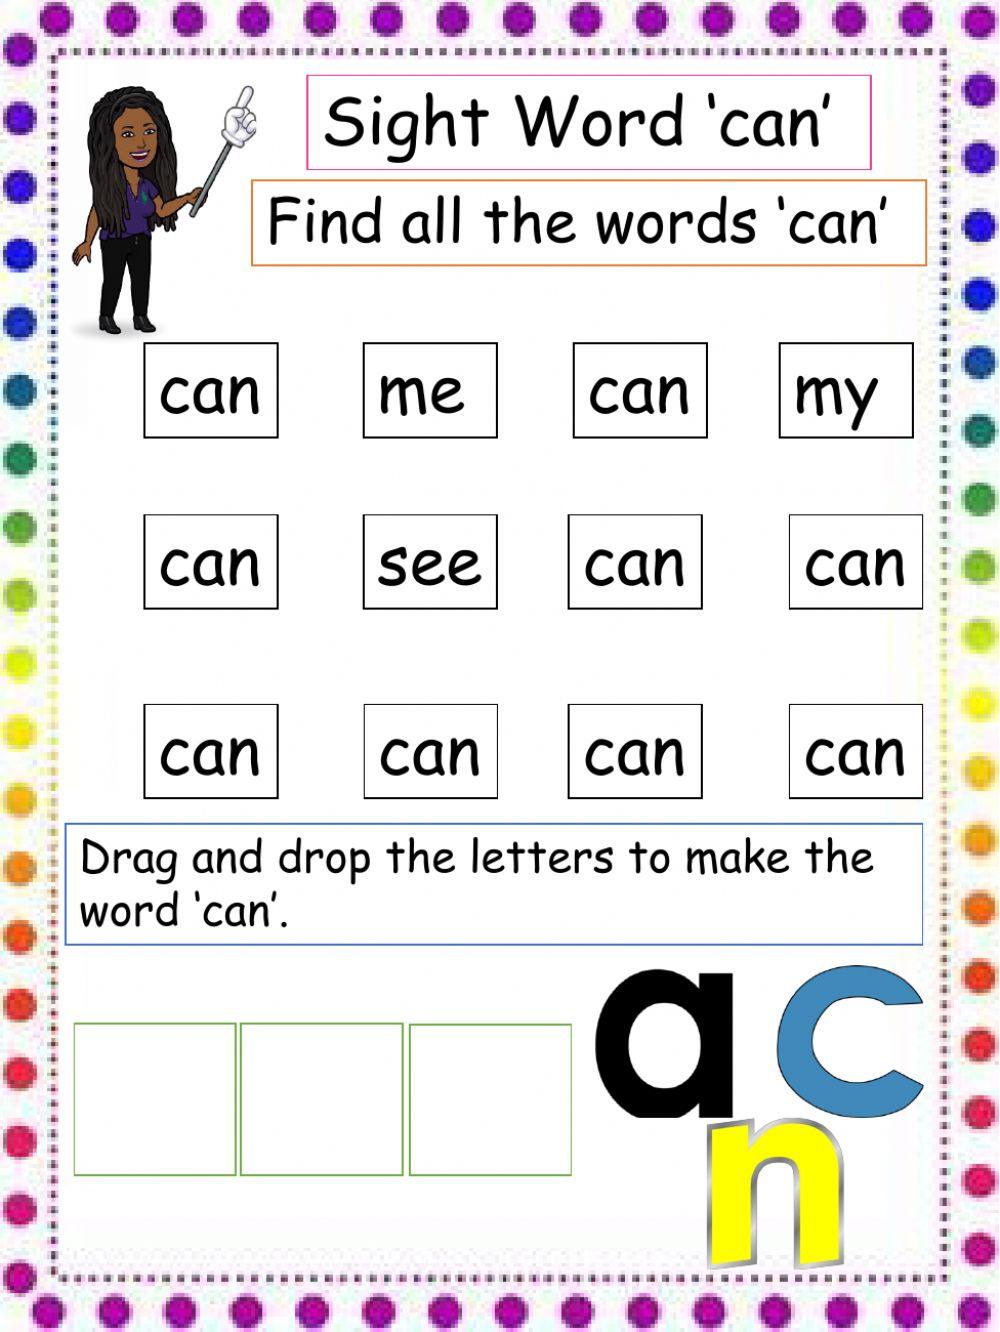 Sight Word can